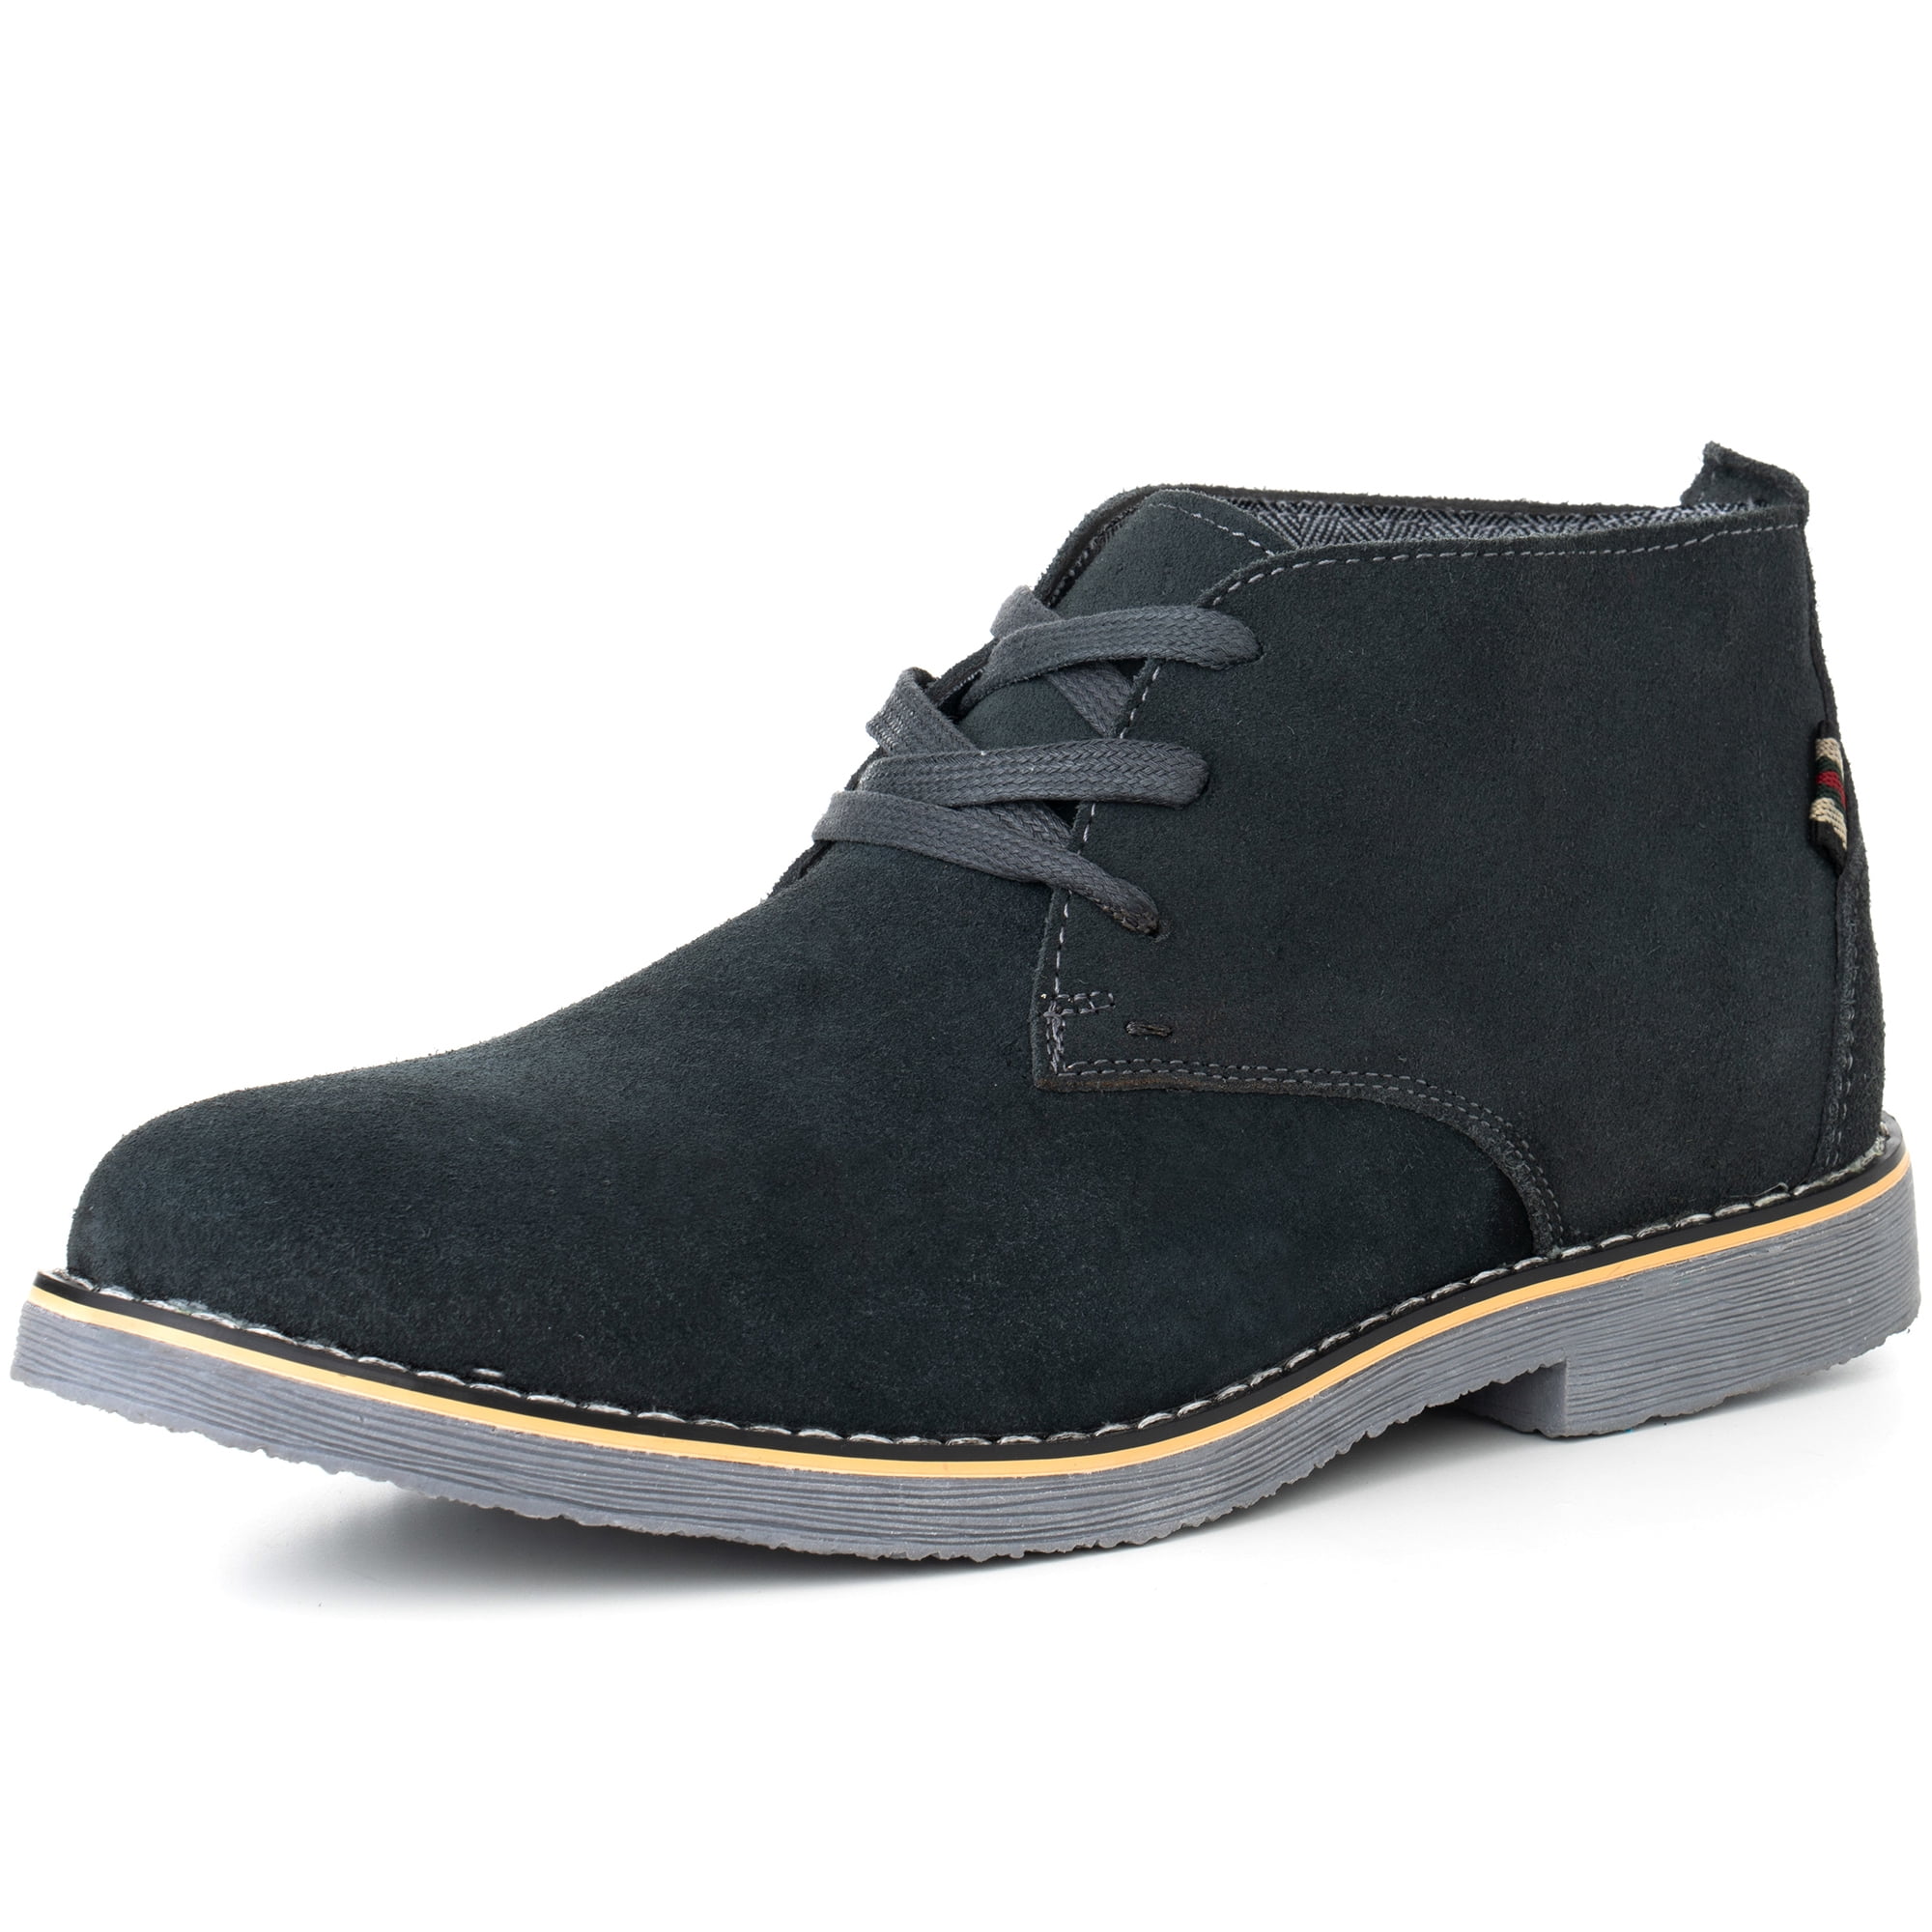 Moshulu Mens Suede Leather Heavy Tread Sole Lace Up Ankle Chukka Boots Shoes